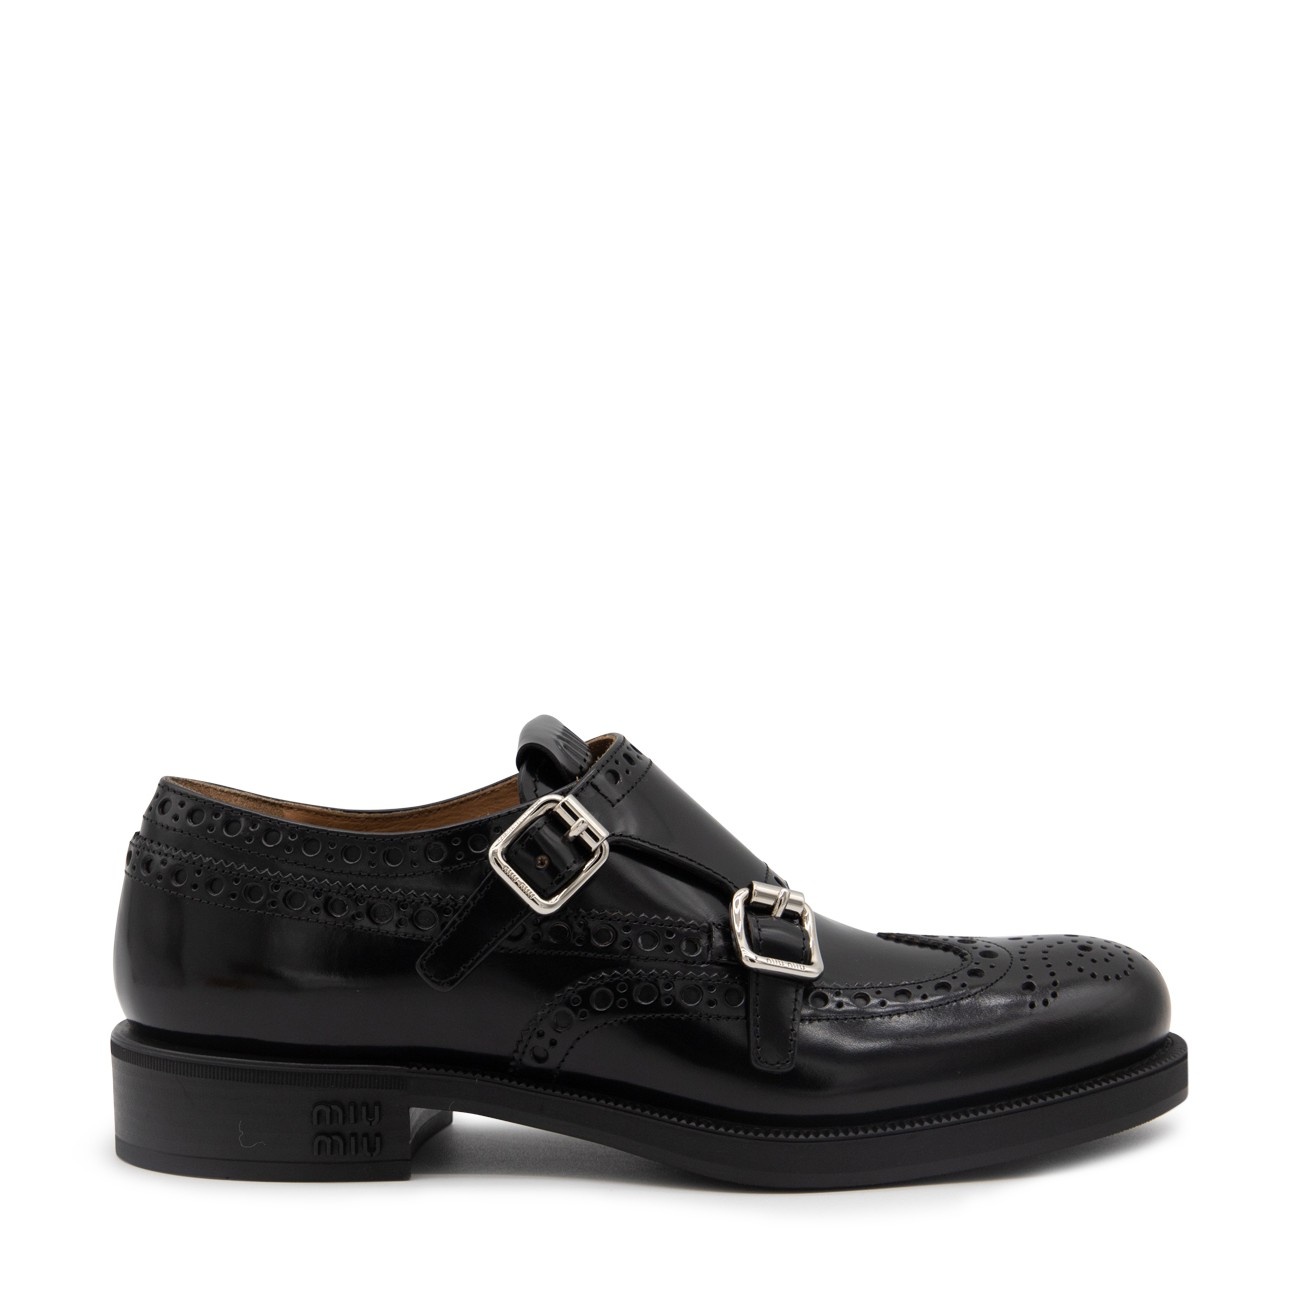 black leather formal shoes - 1